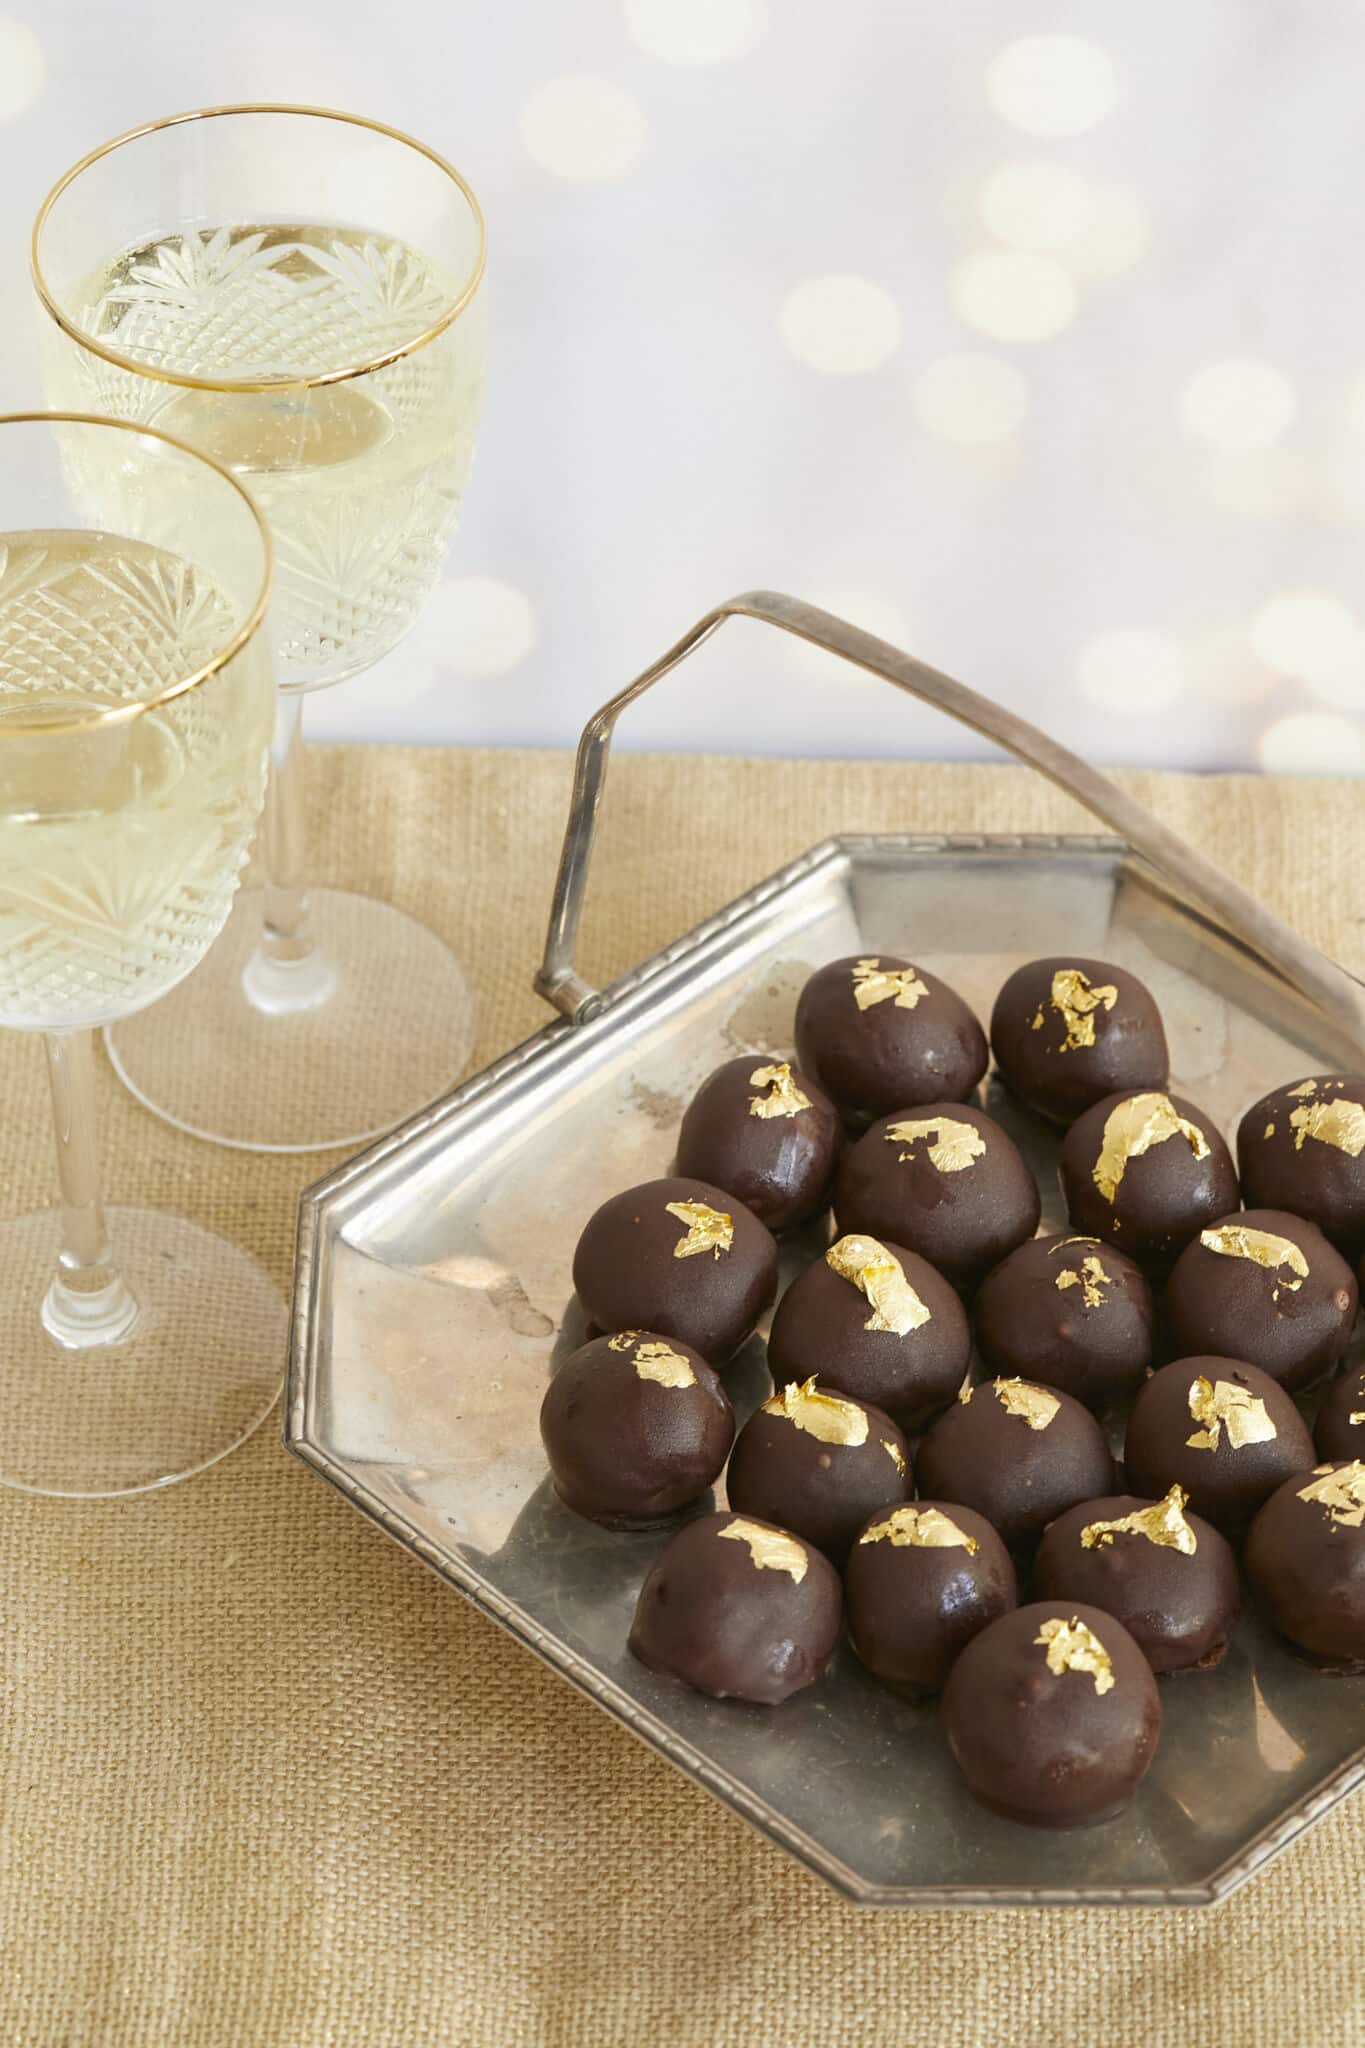 Heavenly Champagne Truffles are placed on a silver platter with a handle. they have bittersweet chocolate shells and are decorated with edible gold leaves. Two glasses of champagne are served on the side. 